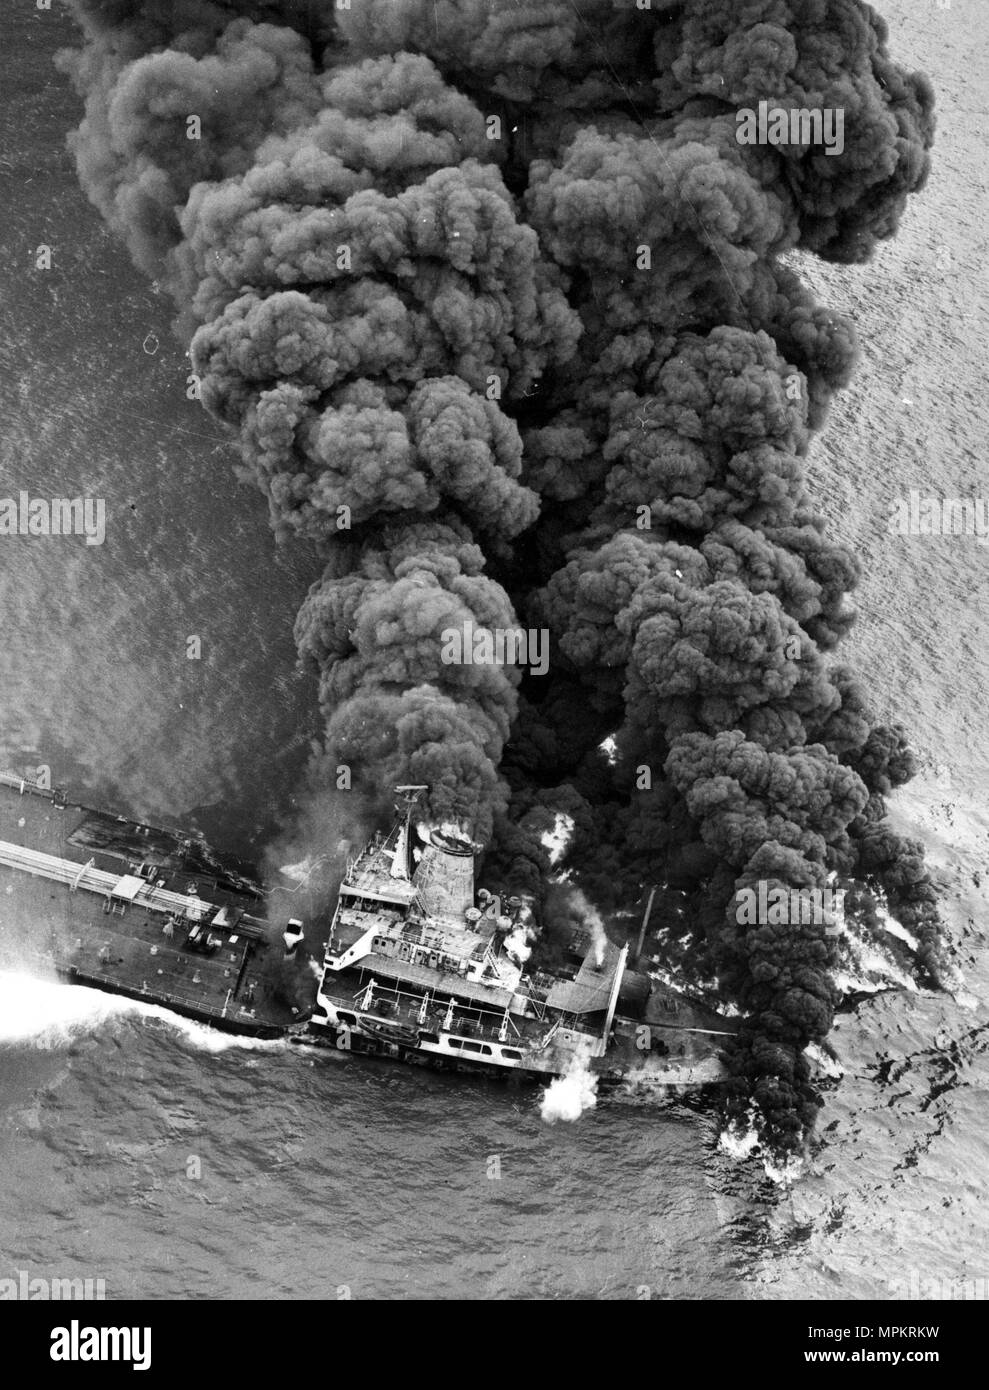 THE TANKER PACIFIC GLORY BLAZES OFF THE COAST OF THE ISLE OF WIGHT.1968 Stock Photo